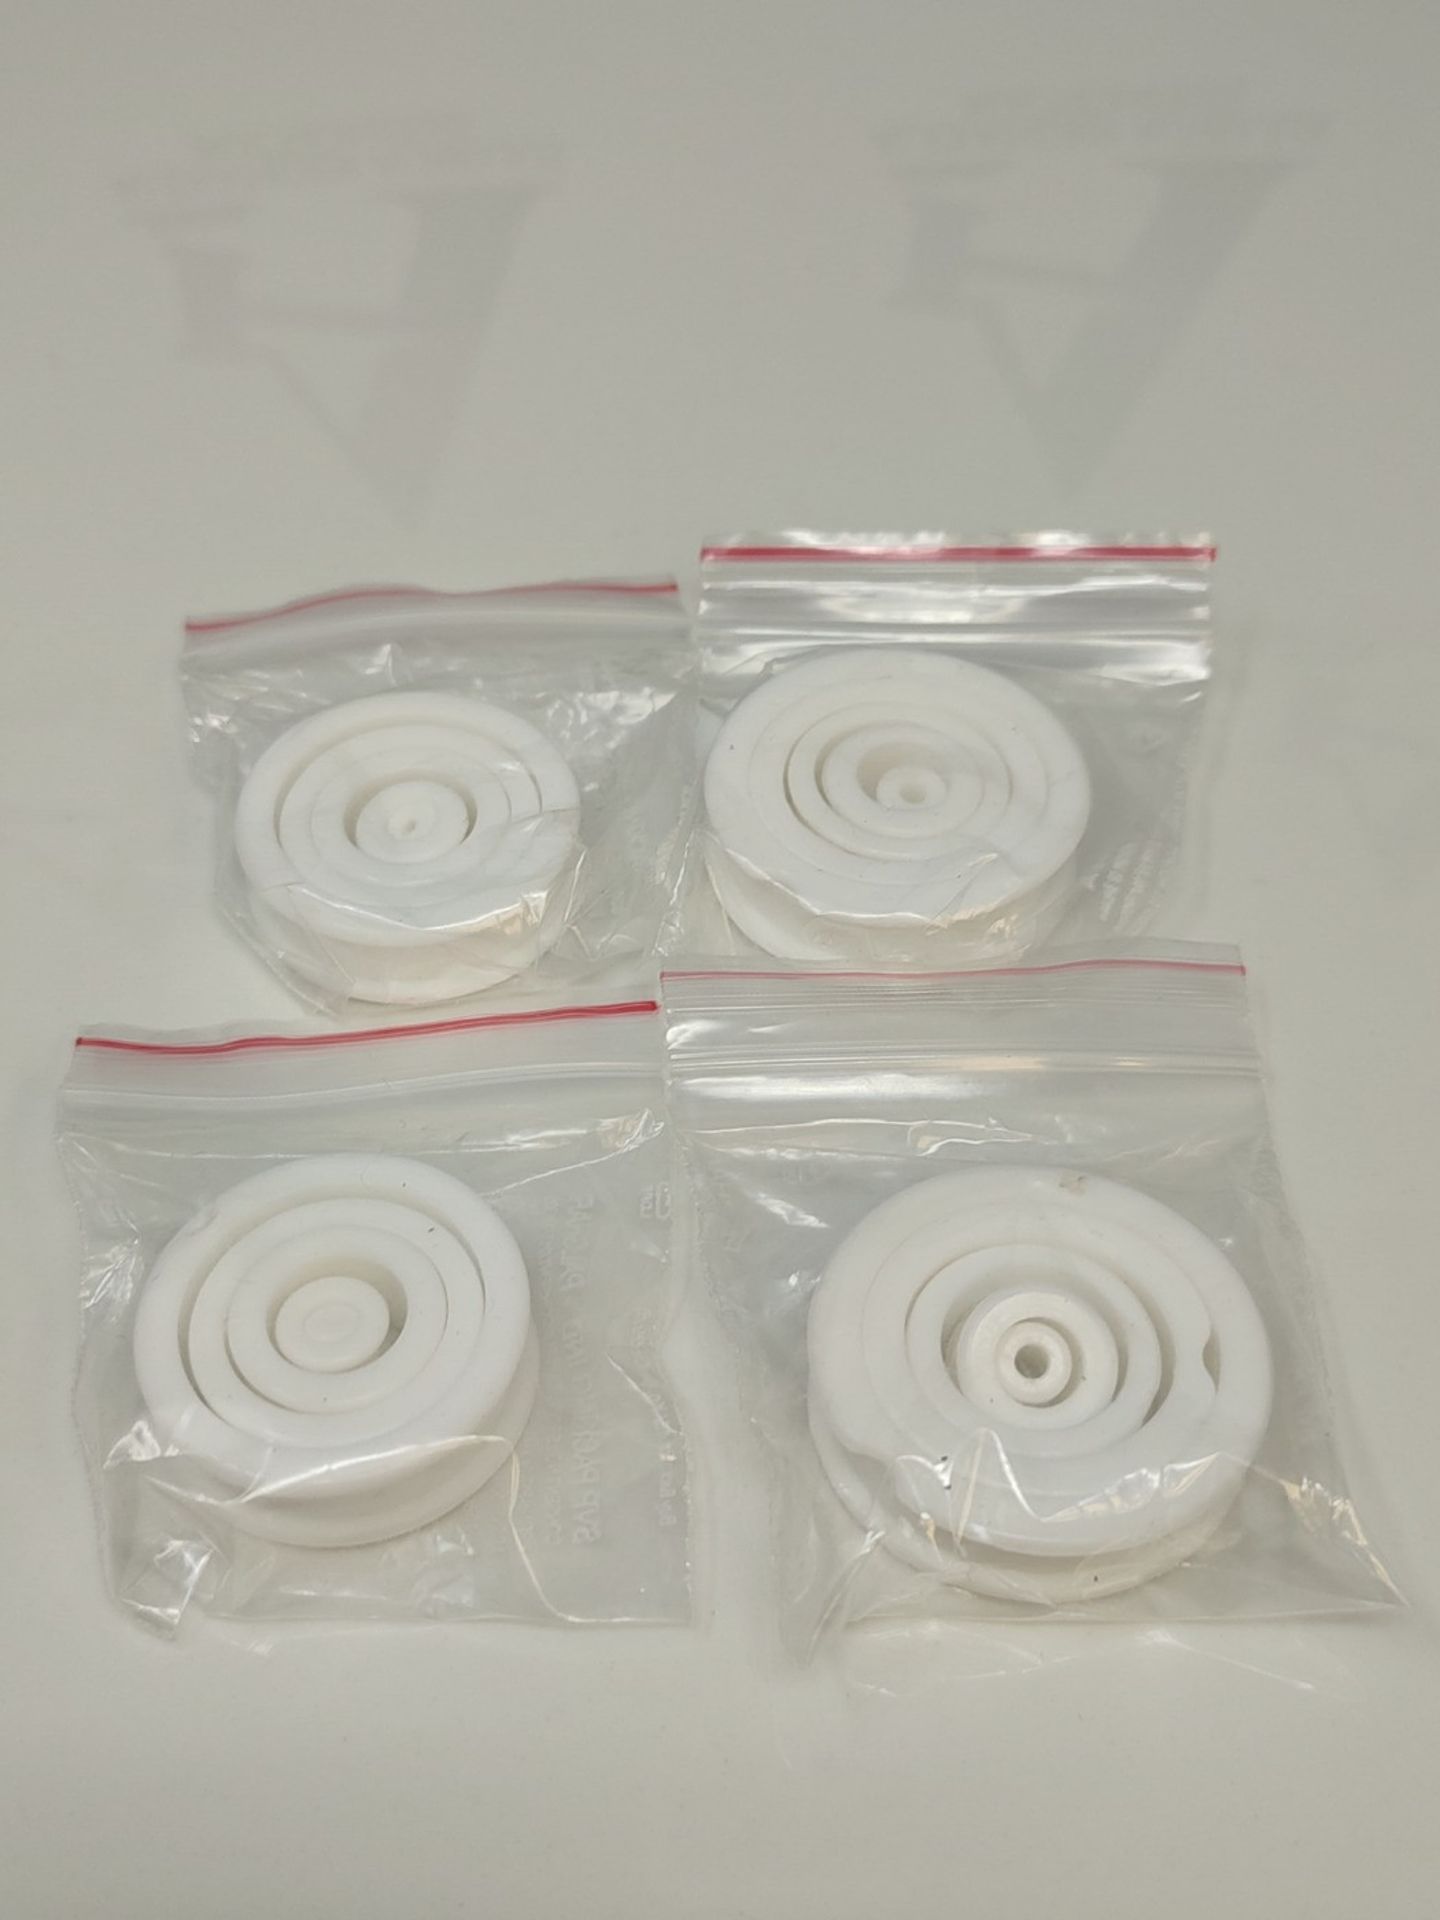 CauseHuman Phimosis Stretching Rings Set (20 Rings) - Medical Grade Silicone for Safe - Image 2 of 2